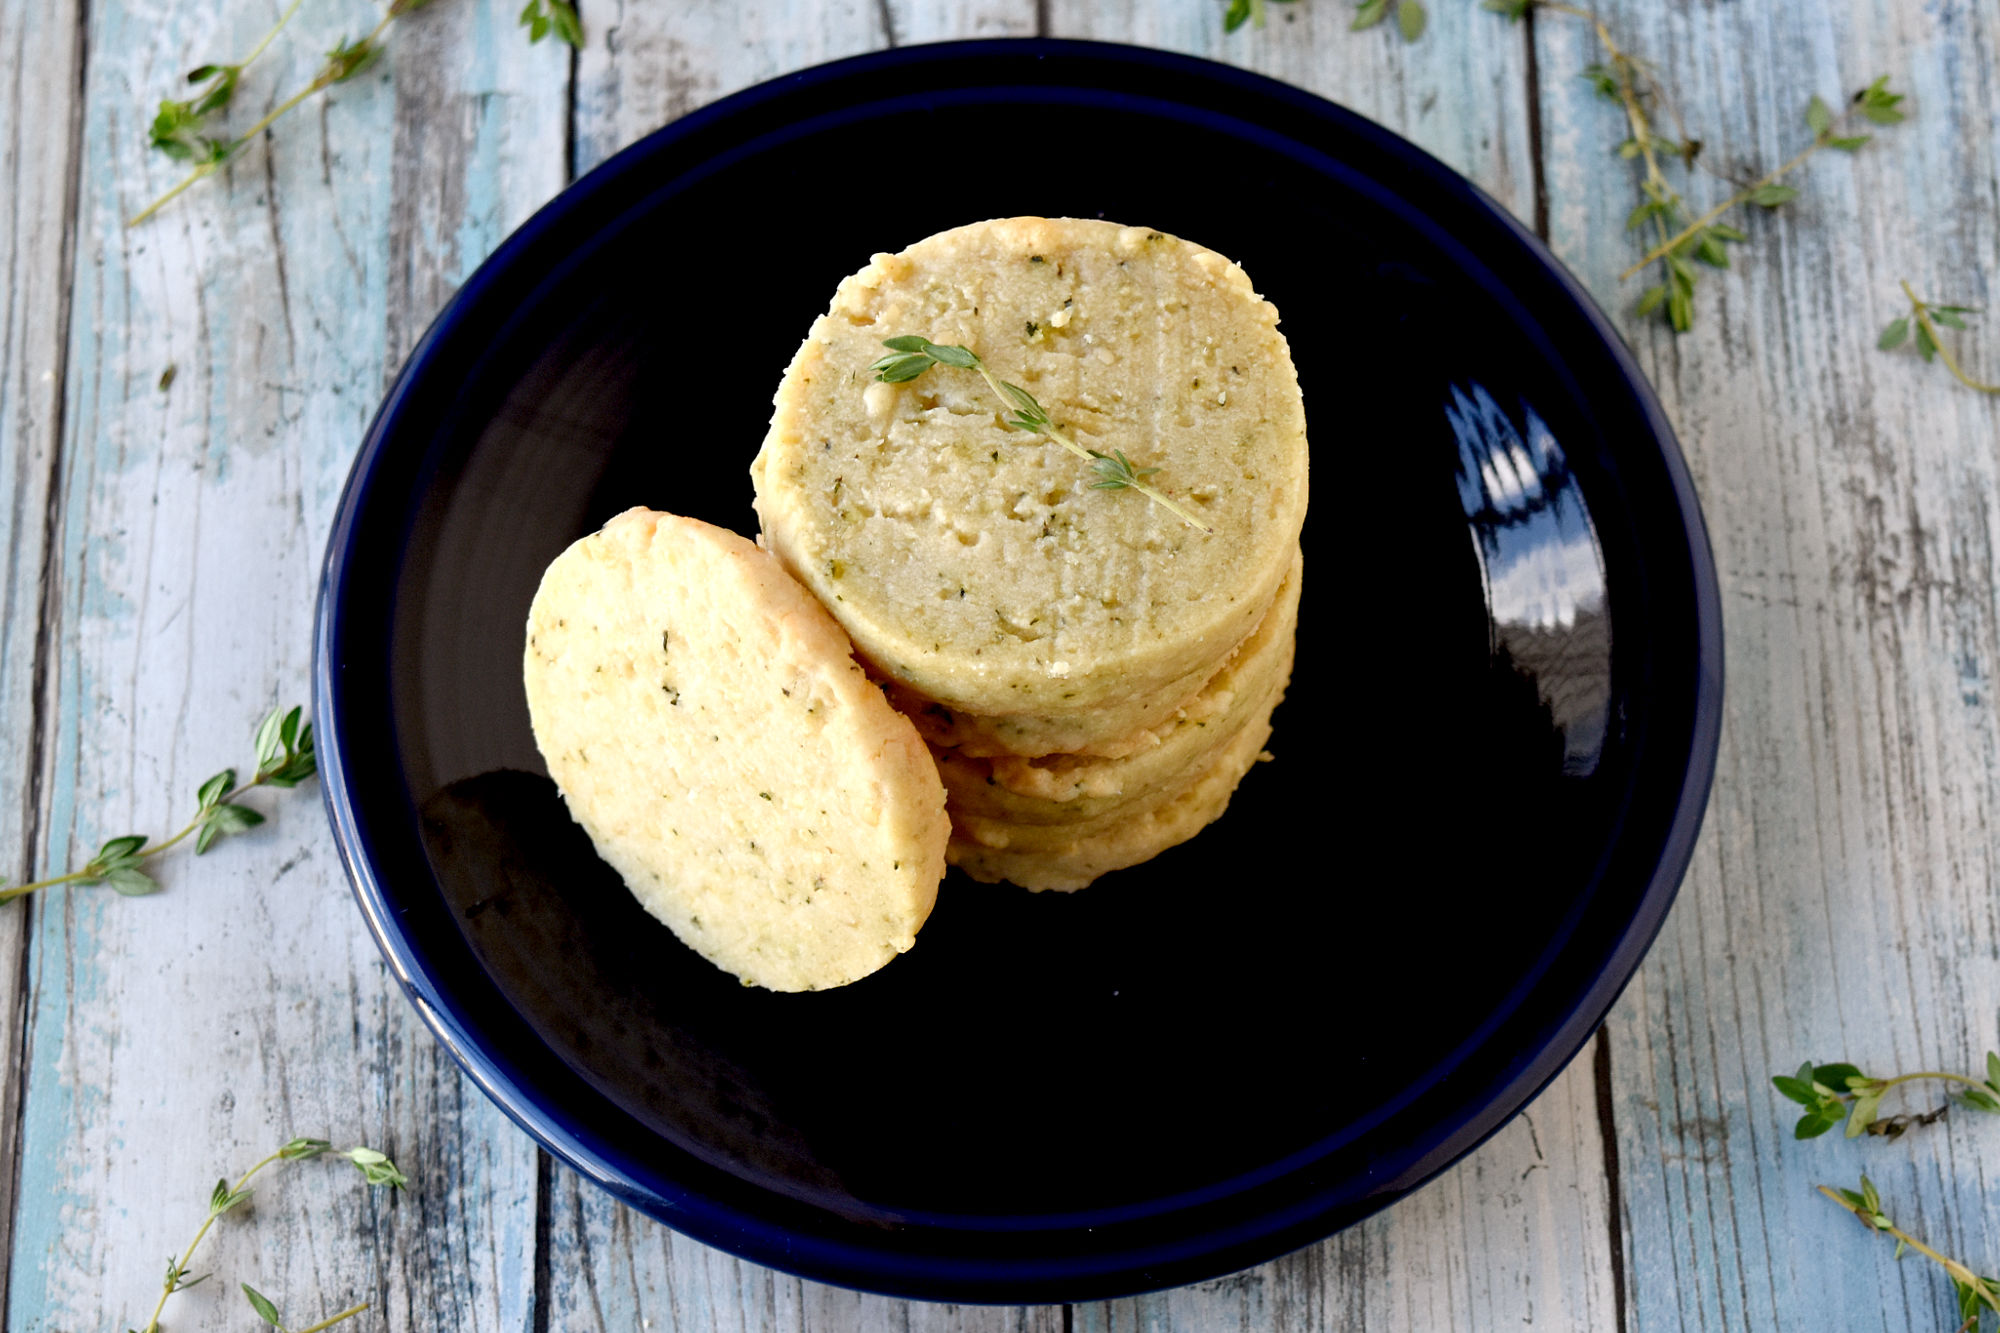 Gruyère and Thyme Shortbread Crackers are simple to make but taste simply delicious. Your guests will think they’re sweet cookies when you set them out before dinner but be surprised when they’re not. #HerbWeek #shortbread #homemadecrackers #Gruyerecheese
